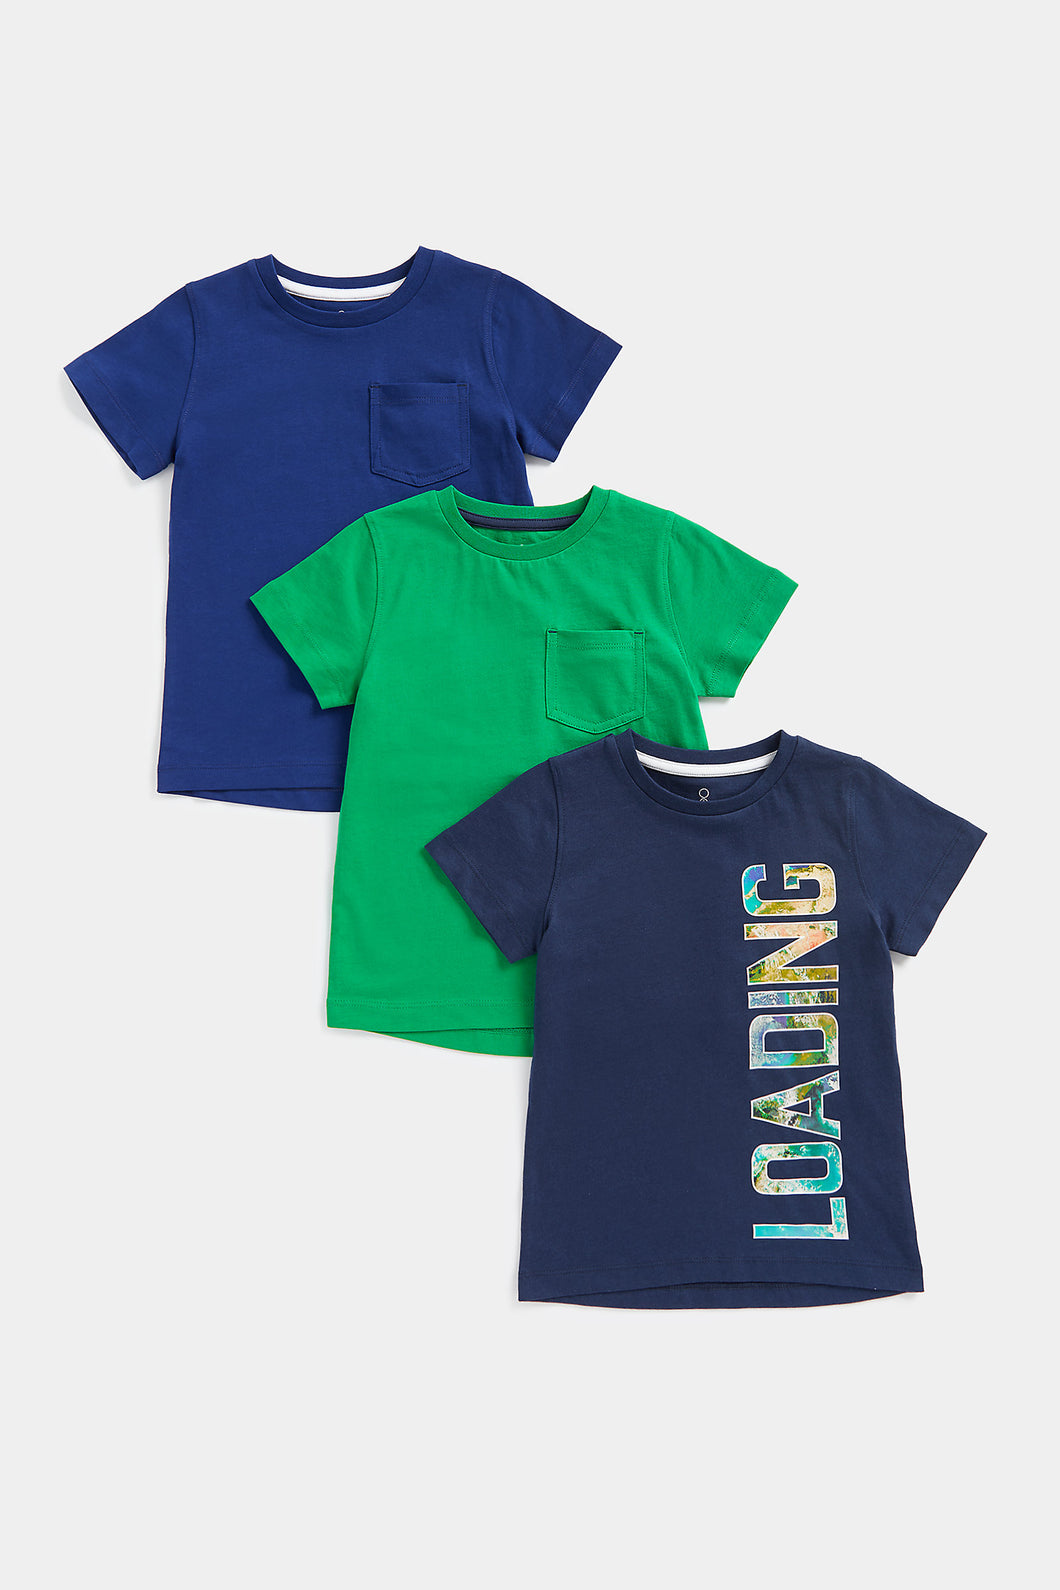 Mothercare Loading T-Shirts - 3 Pack